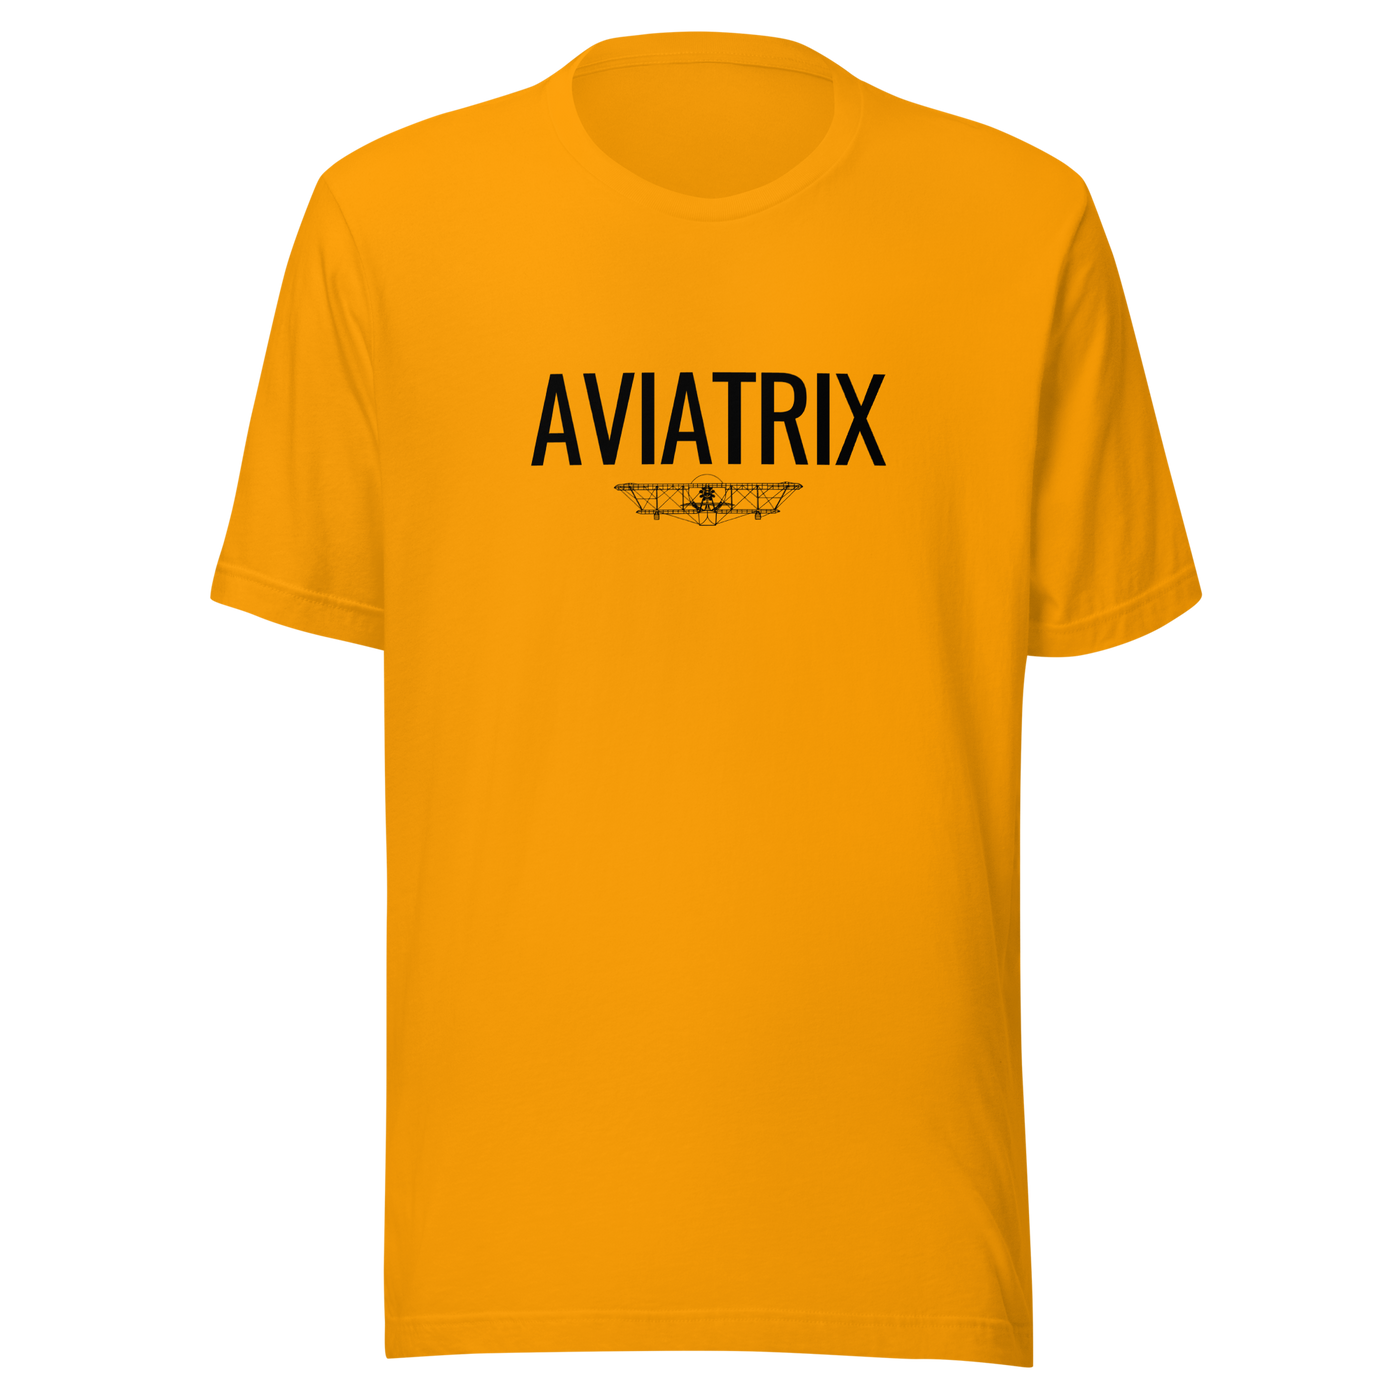 Get trendy with Unisex t-shirt - Aviatrix -  available at SWCH Store. Grab yours for £28 today!